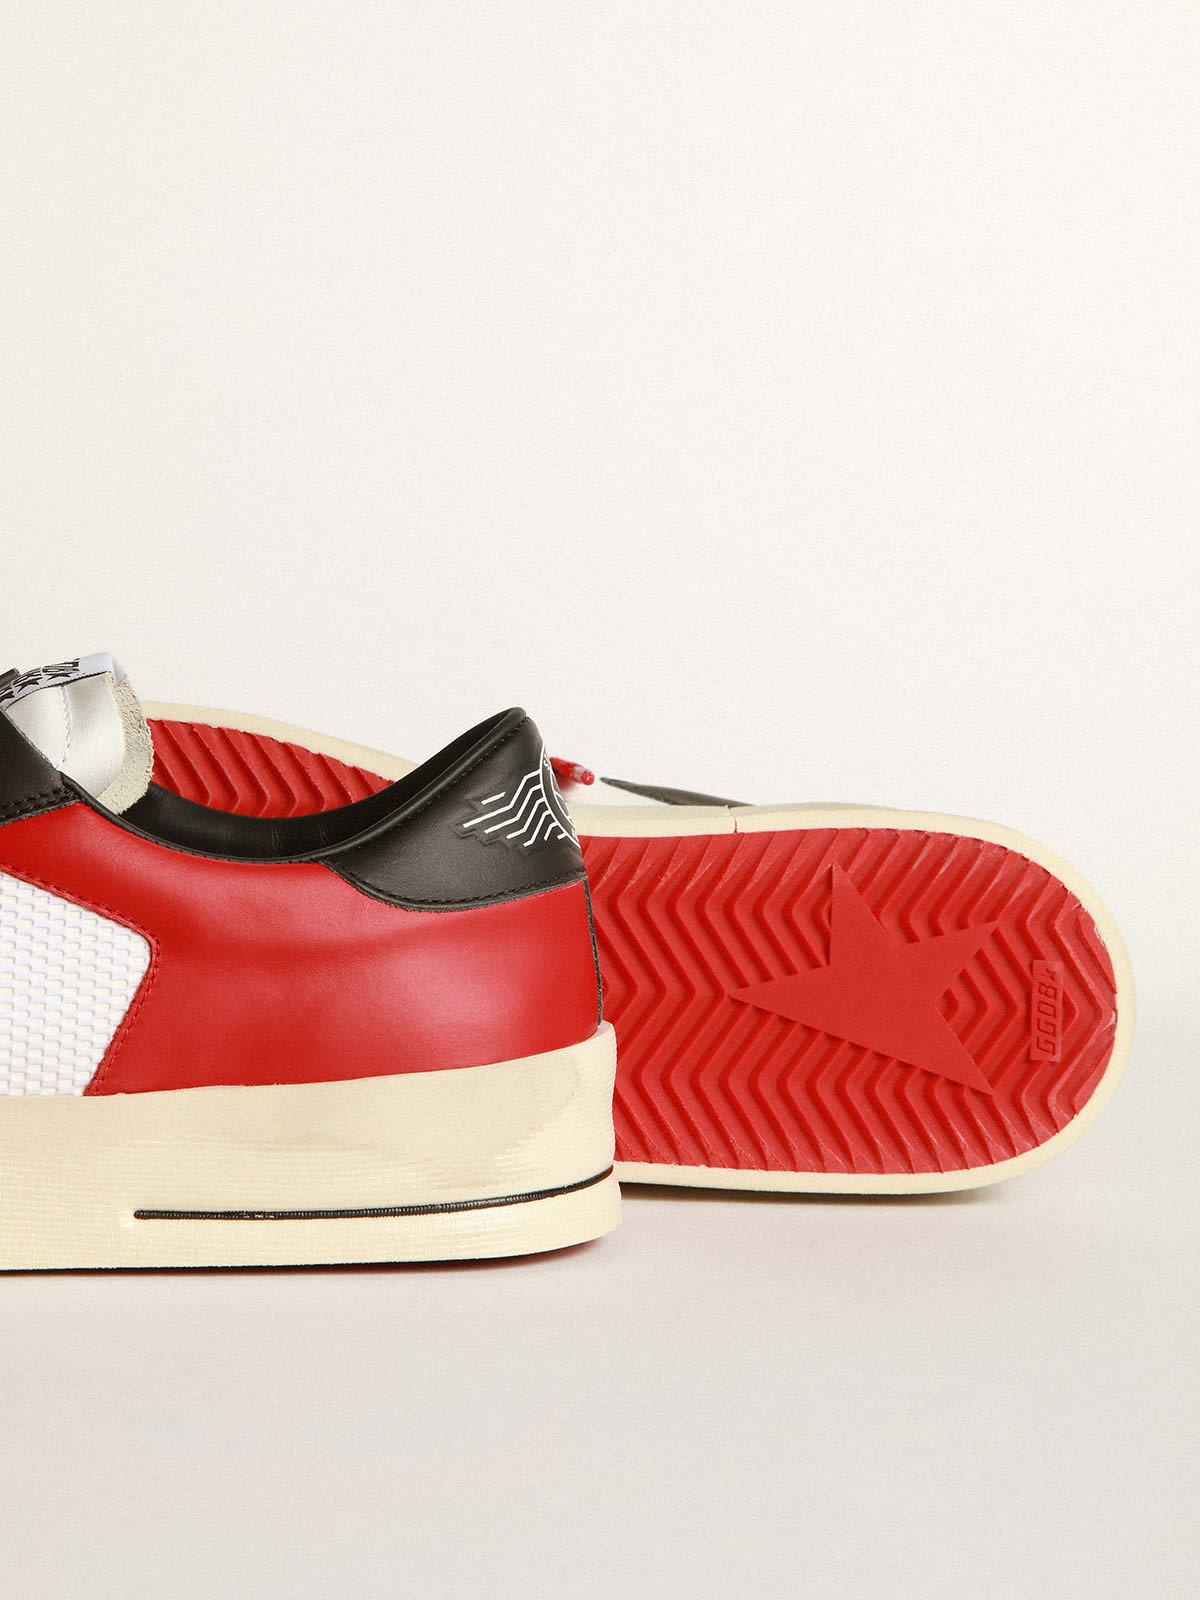 Stardan sneakers in red and white leather with mesh inserts - 3